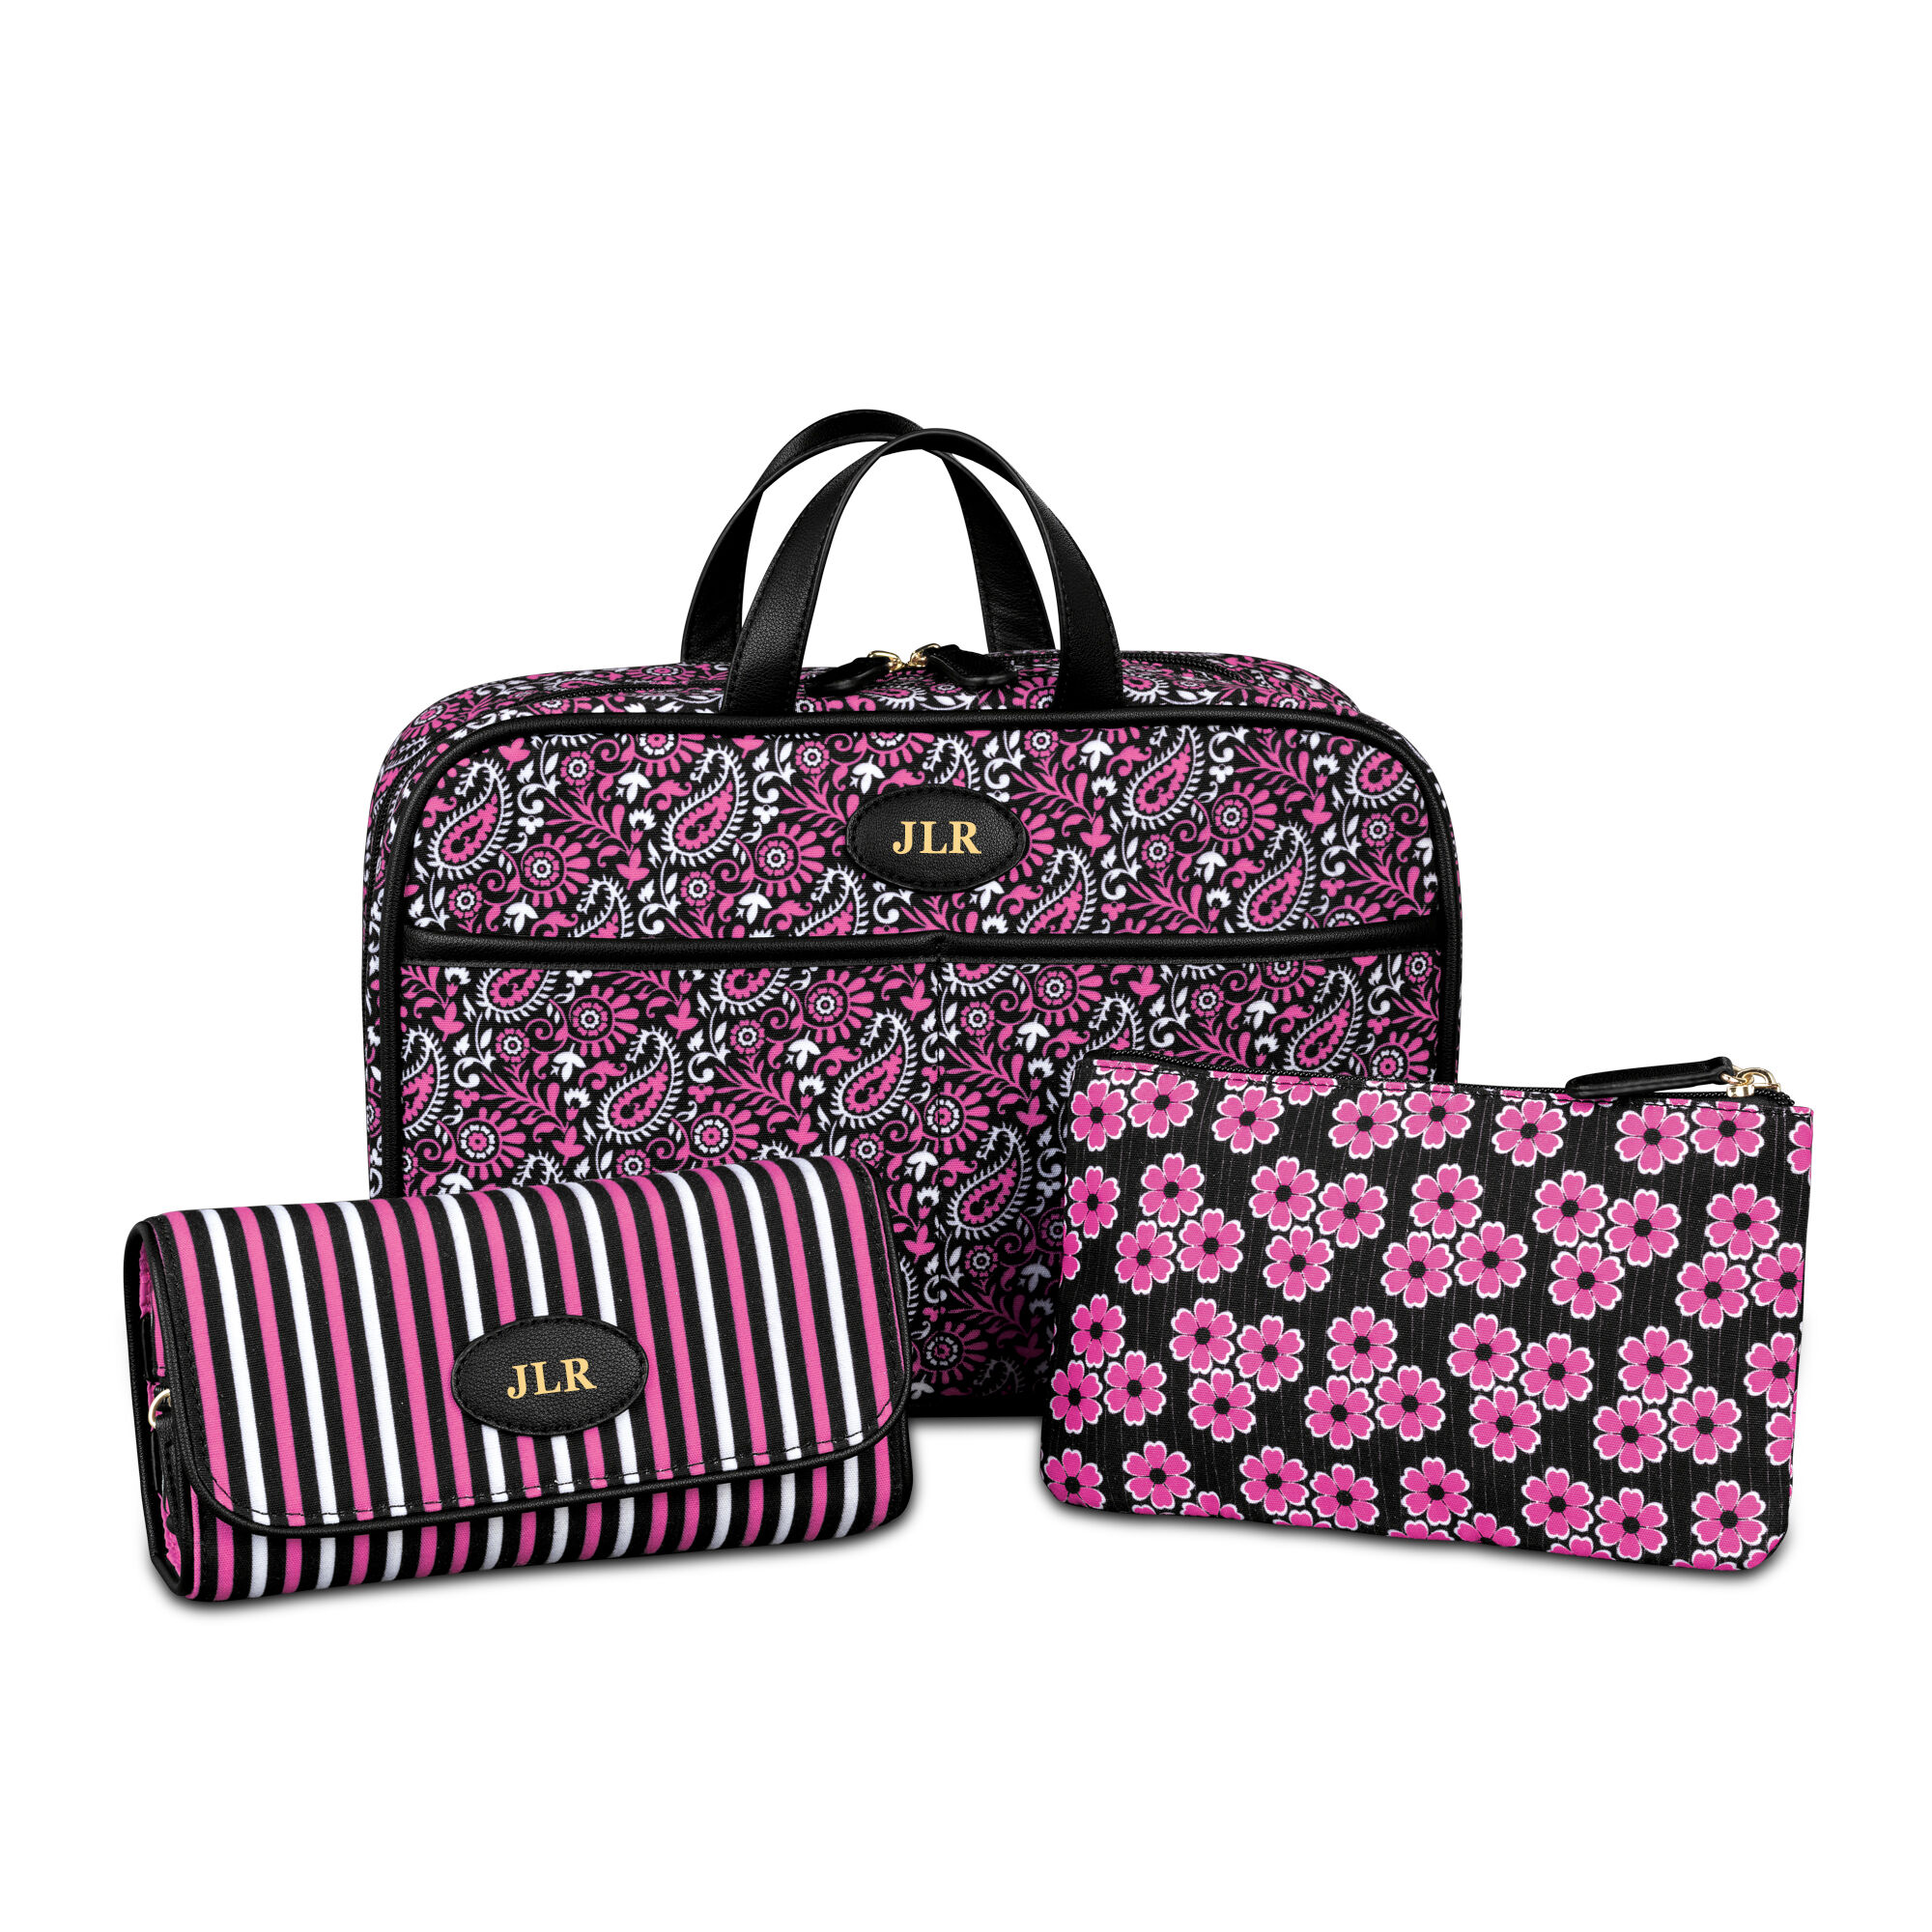 The Personalized Ultimate Travel Set 5548 0016 a main